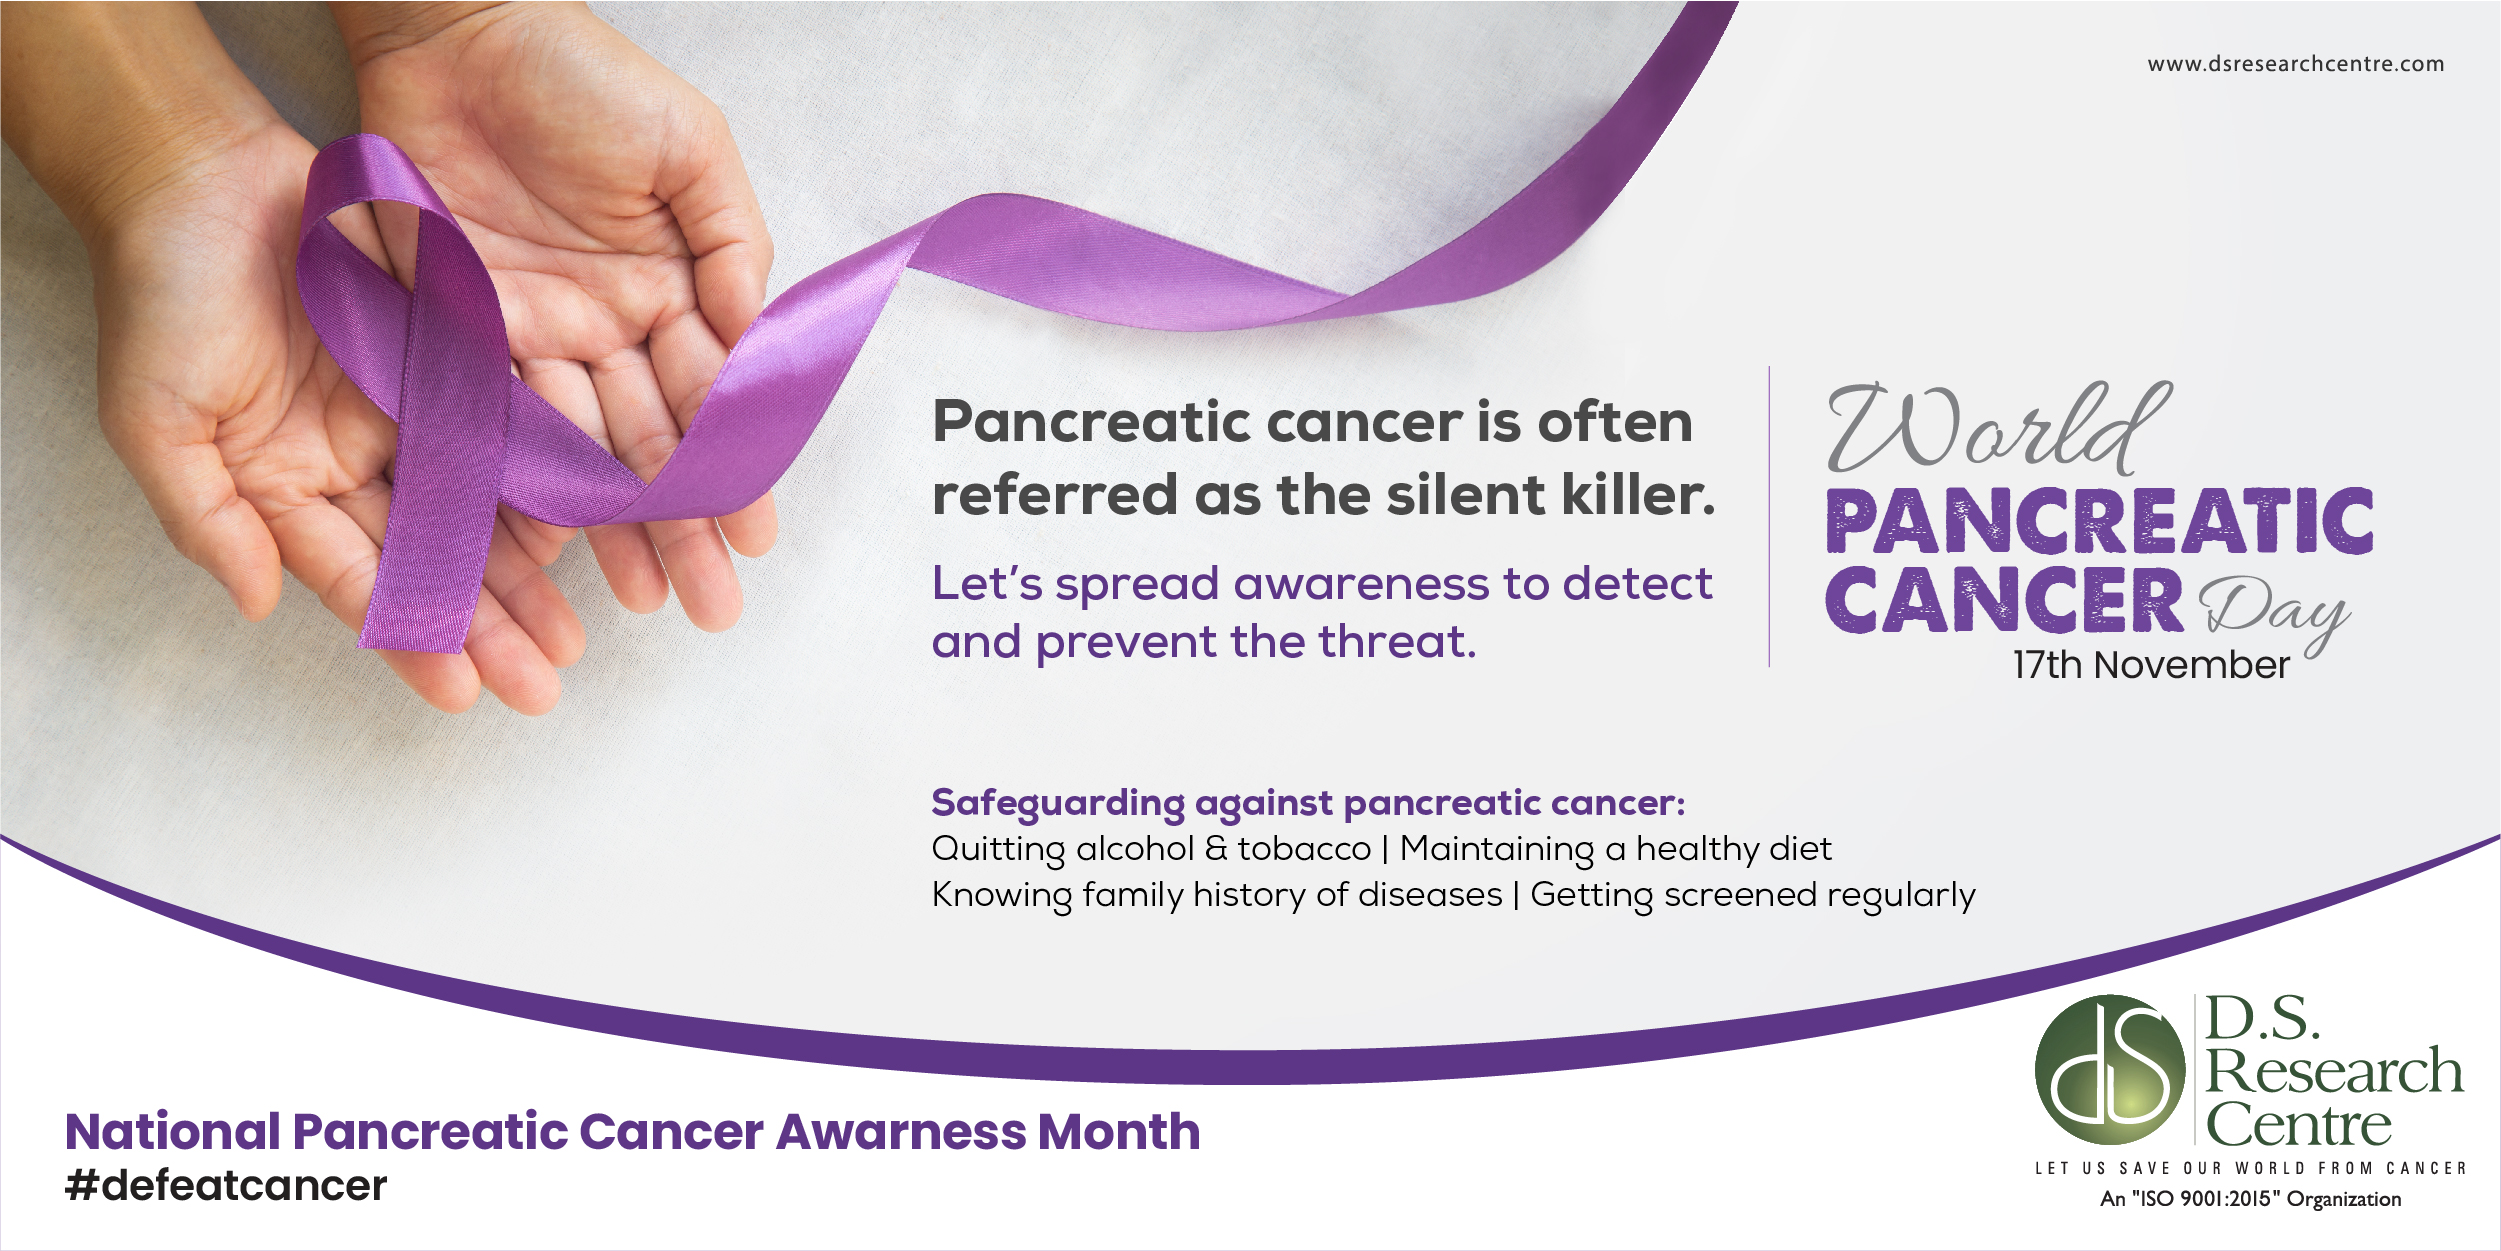 LIVING WITH PANCREATIC CANCER